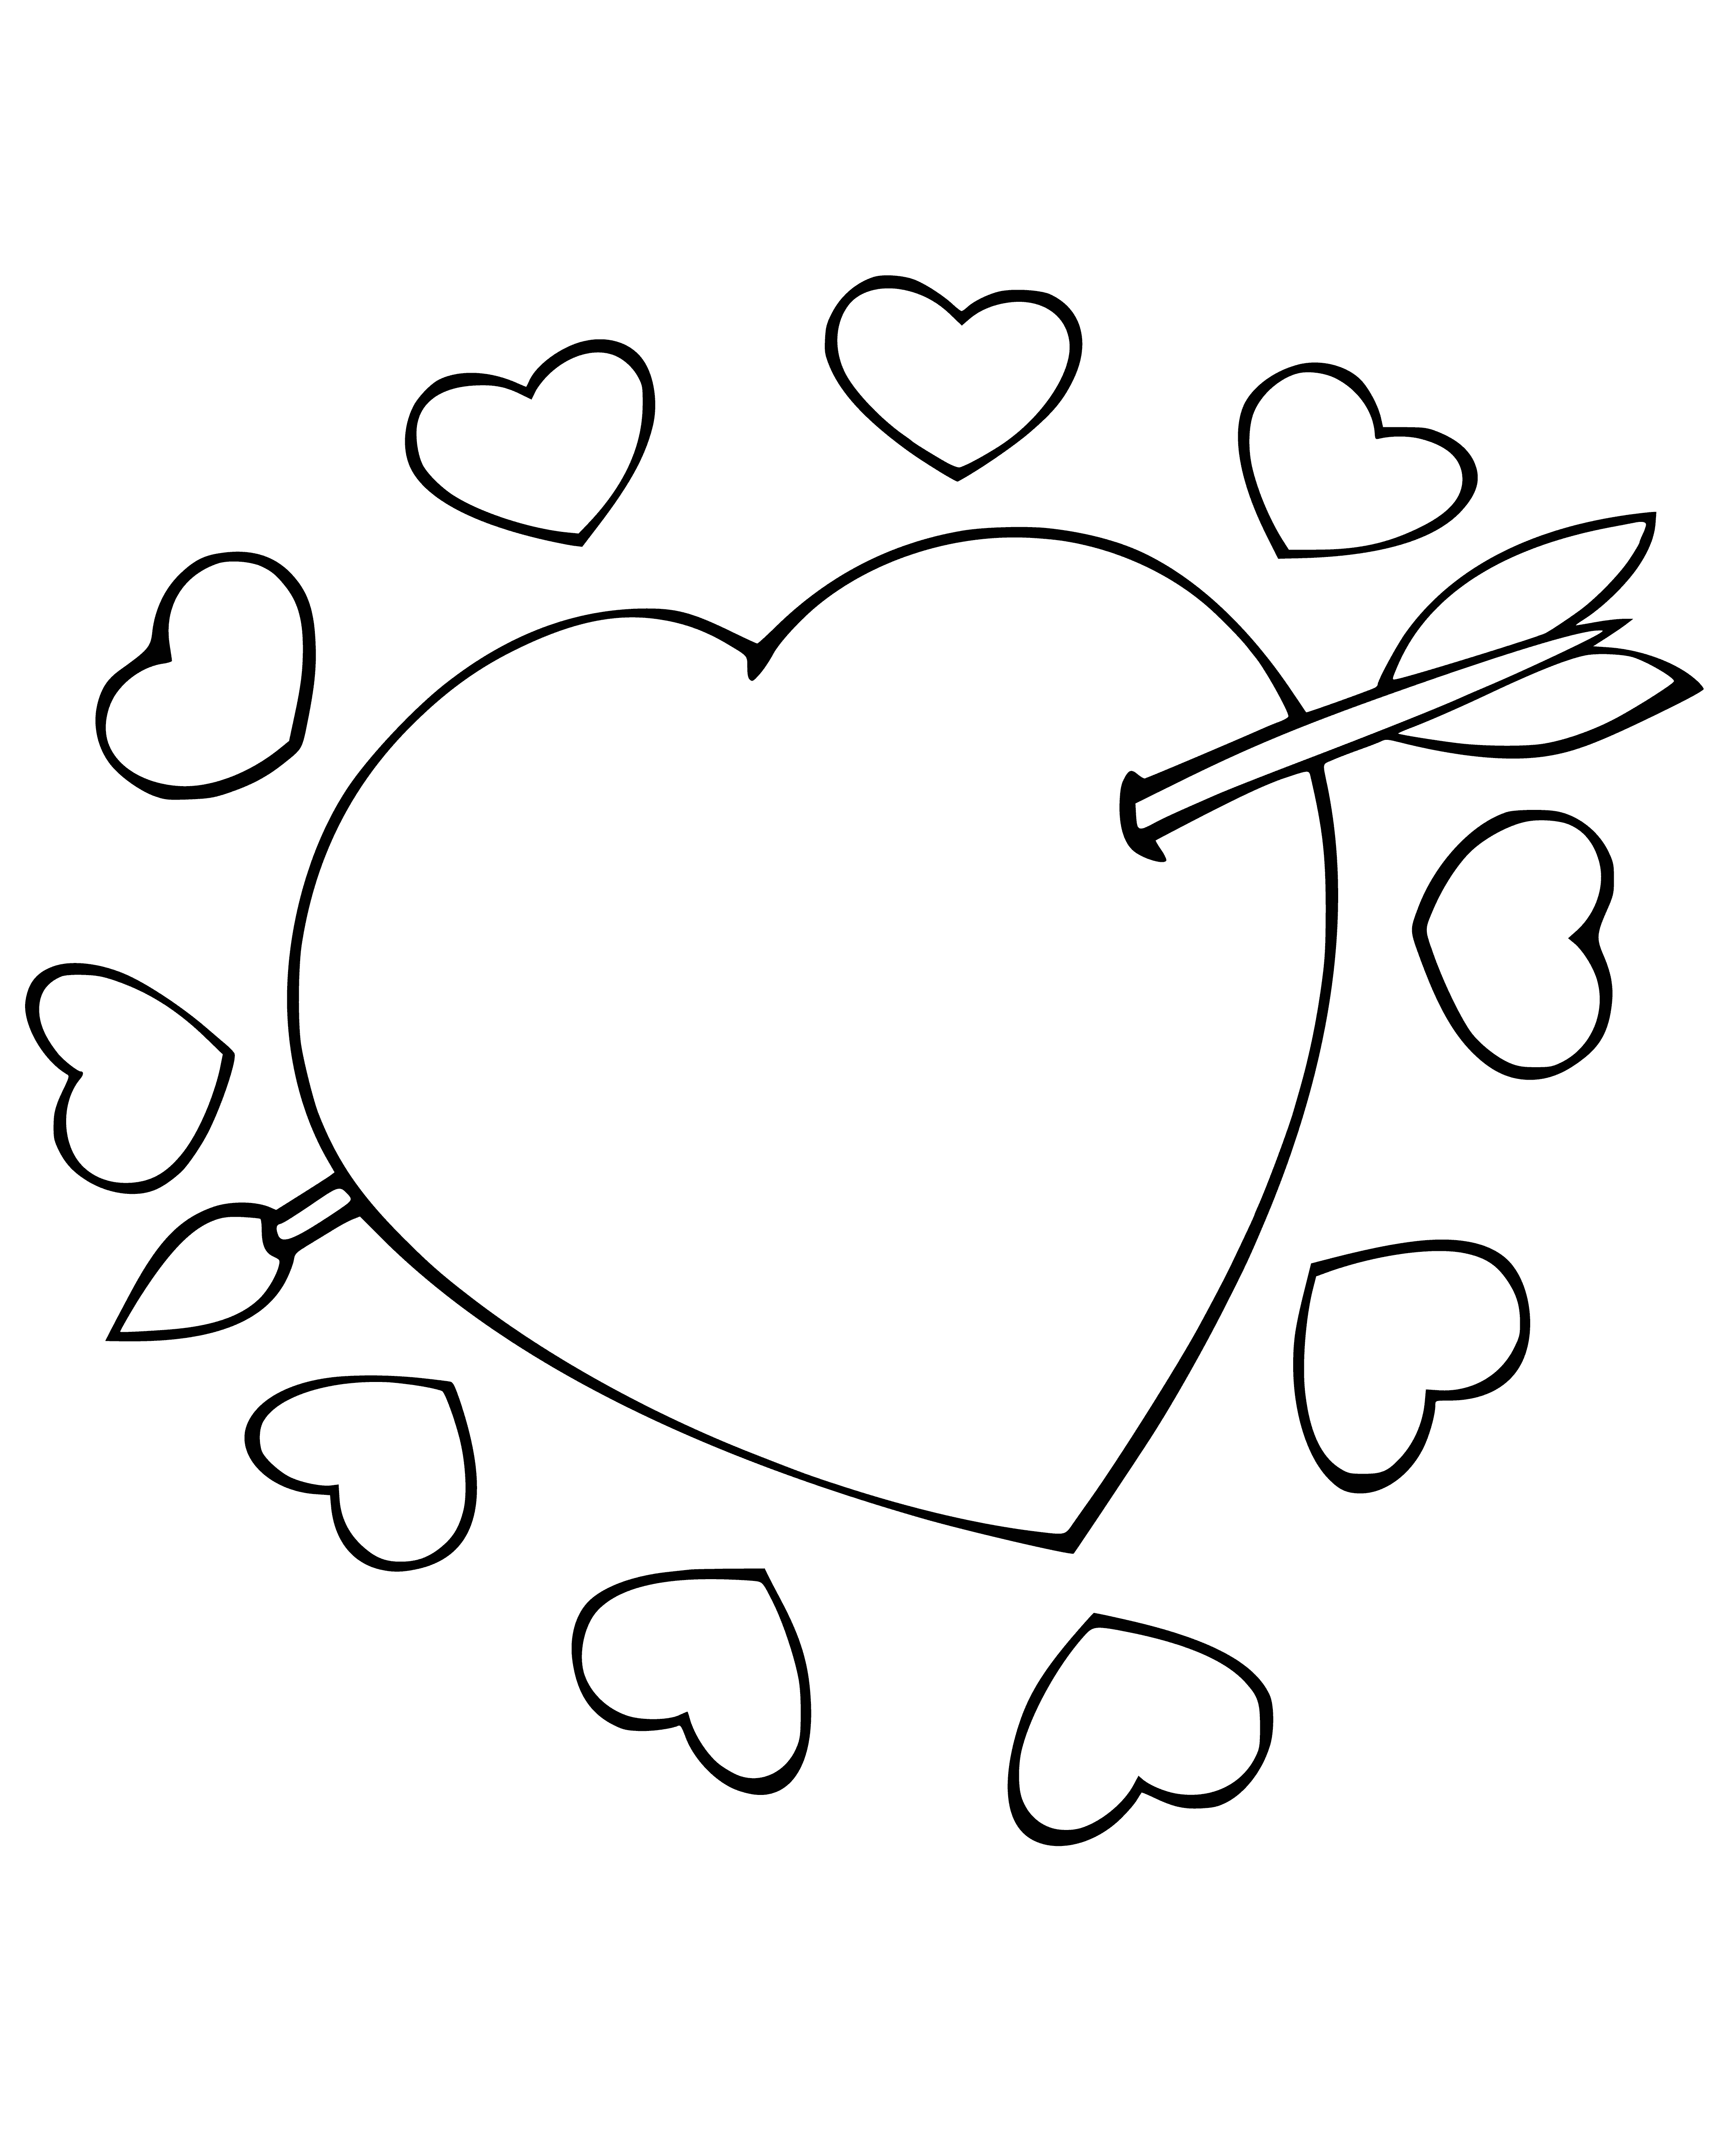 coloring page: Heart pierced with thorns/barbed wire on dark background.